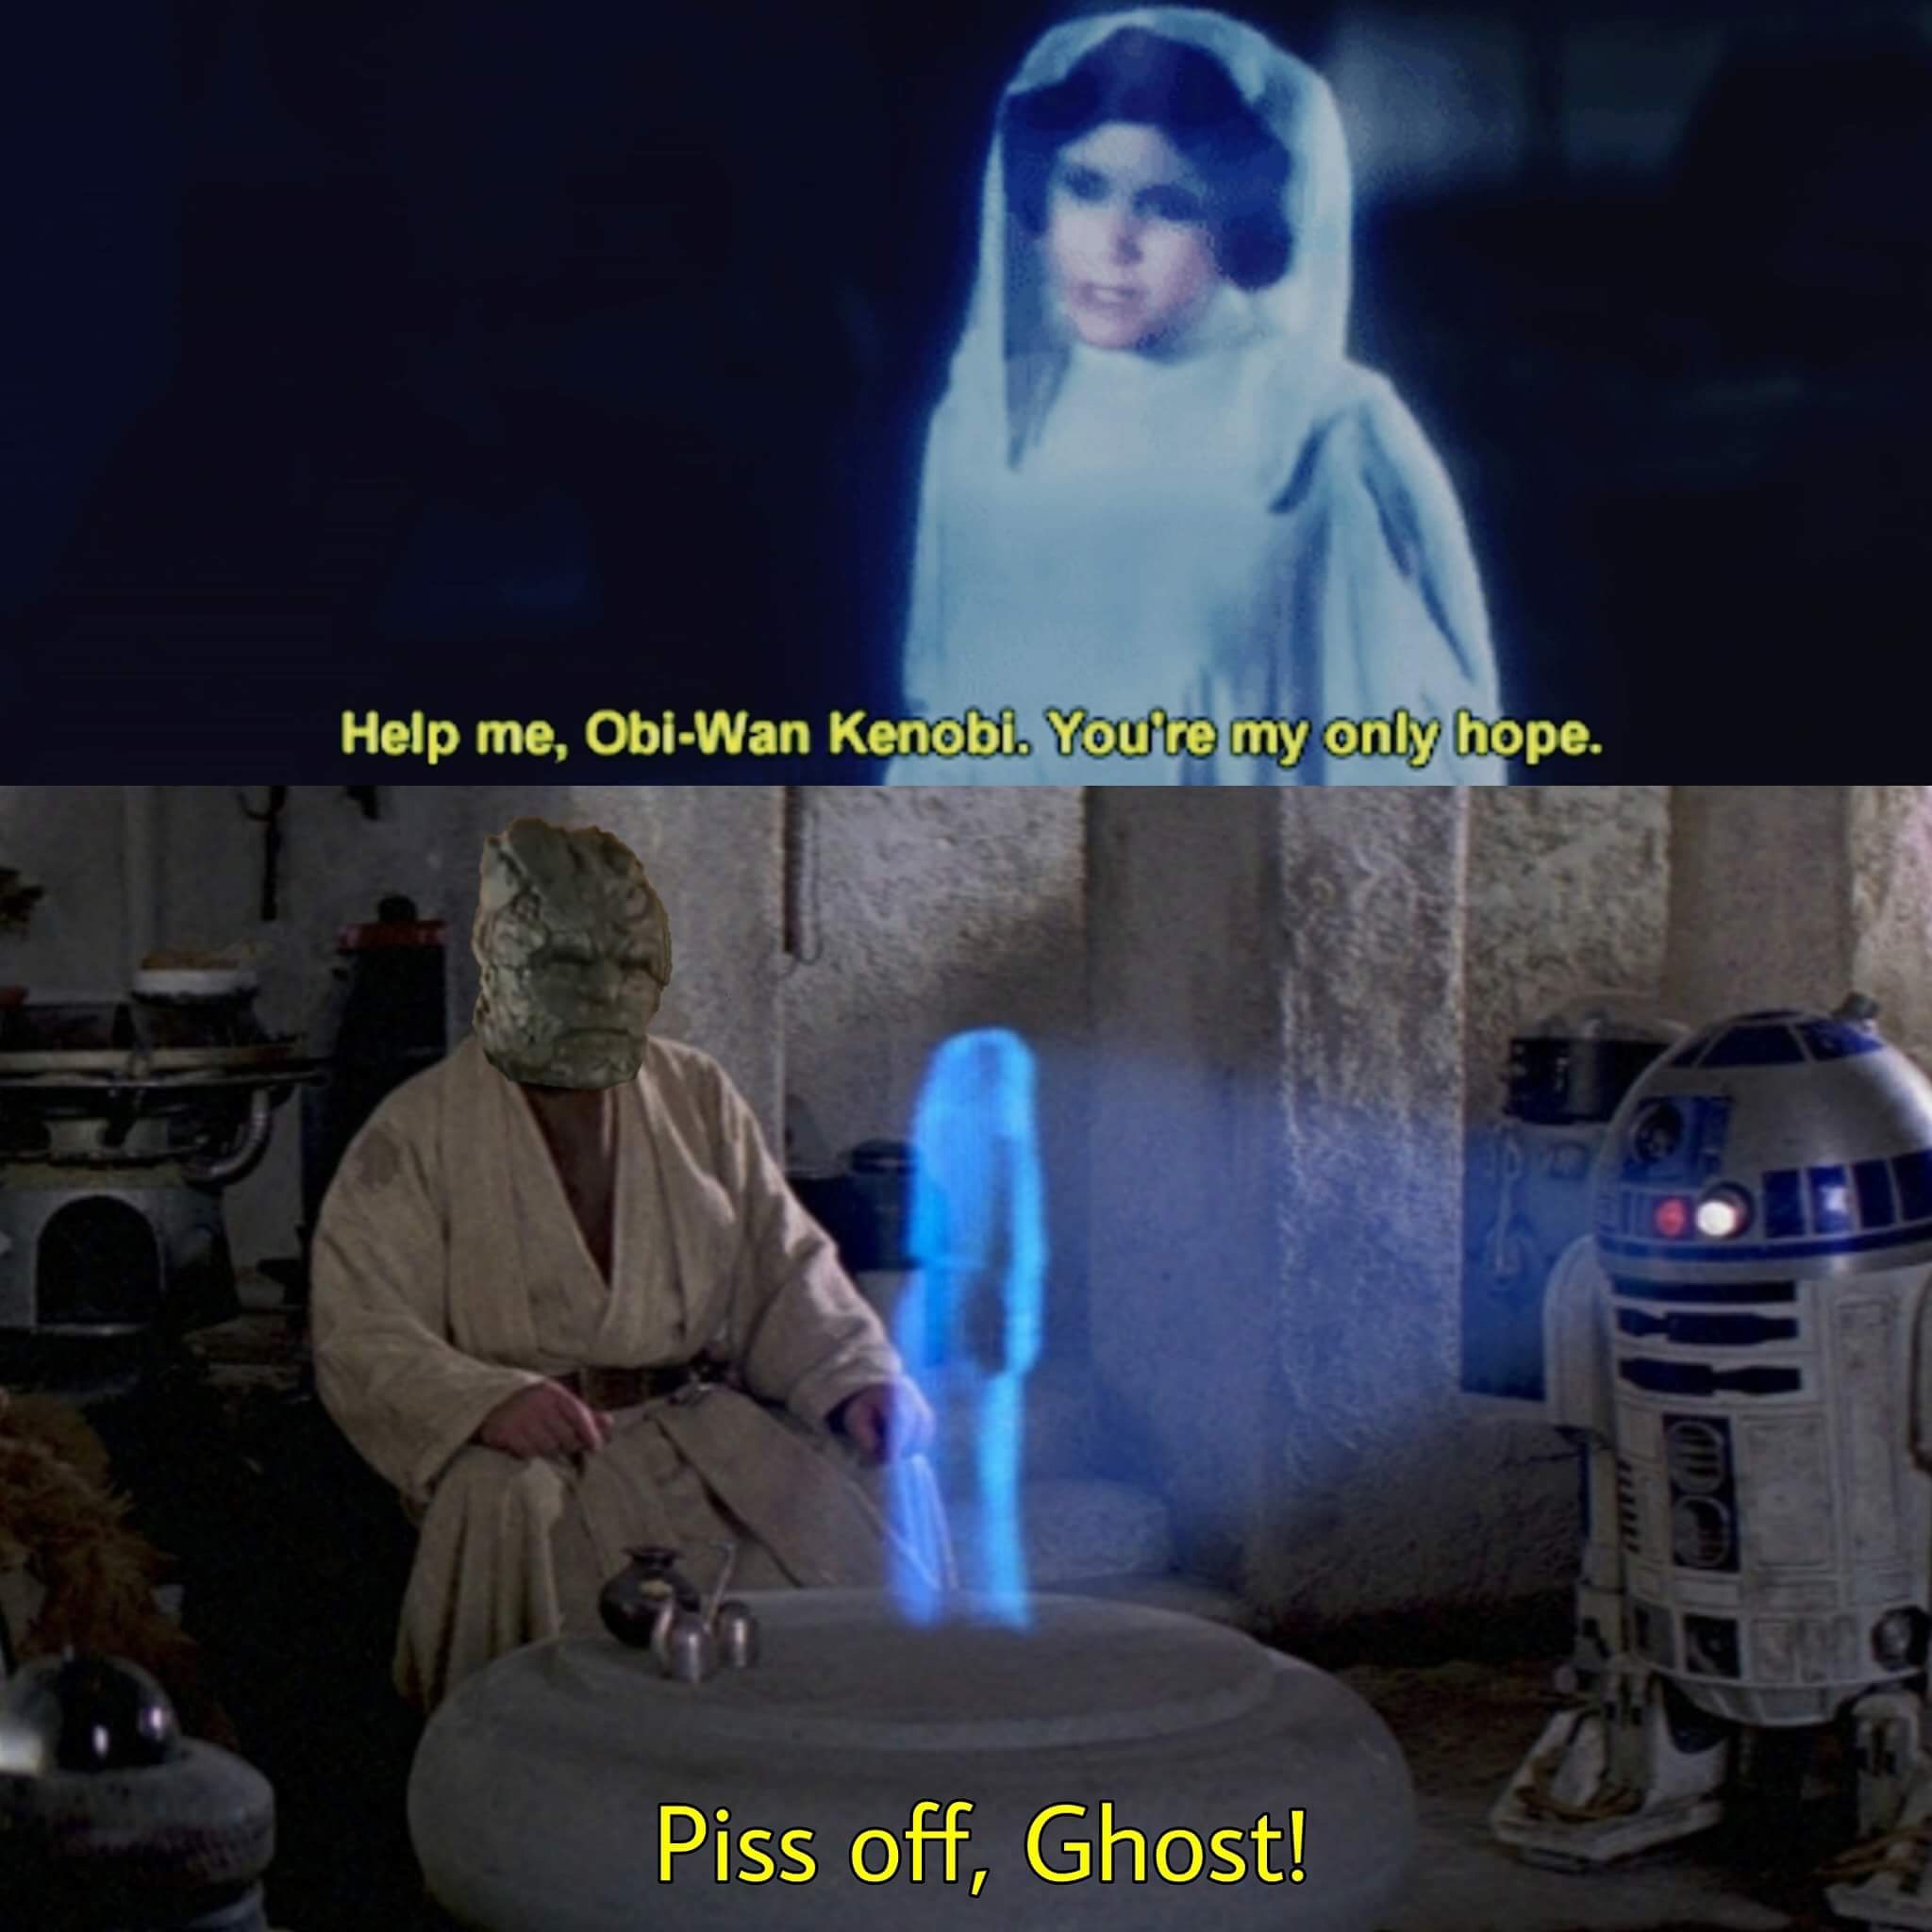 funny meme of piss off ghost meme - Help me, ObiWan Kenobi. You're my only hope. Piss off, Ghost!